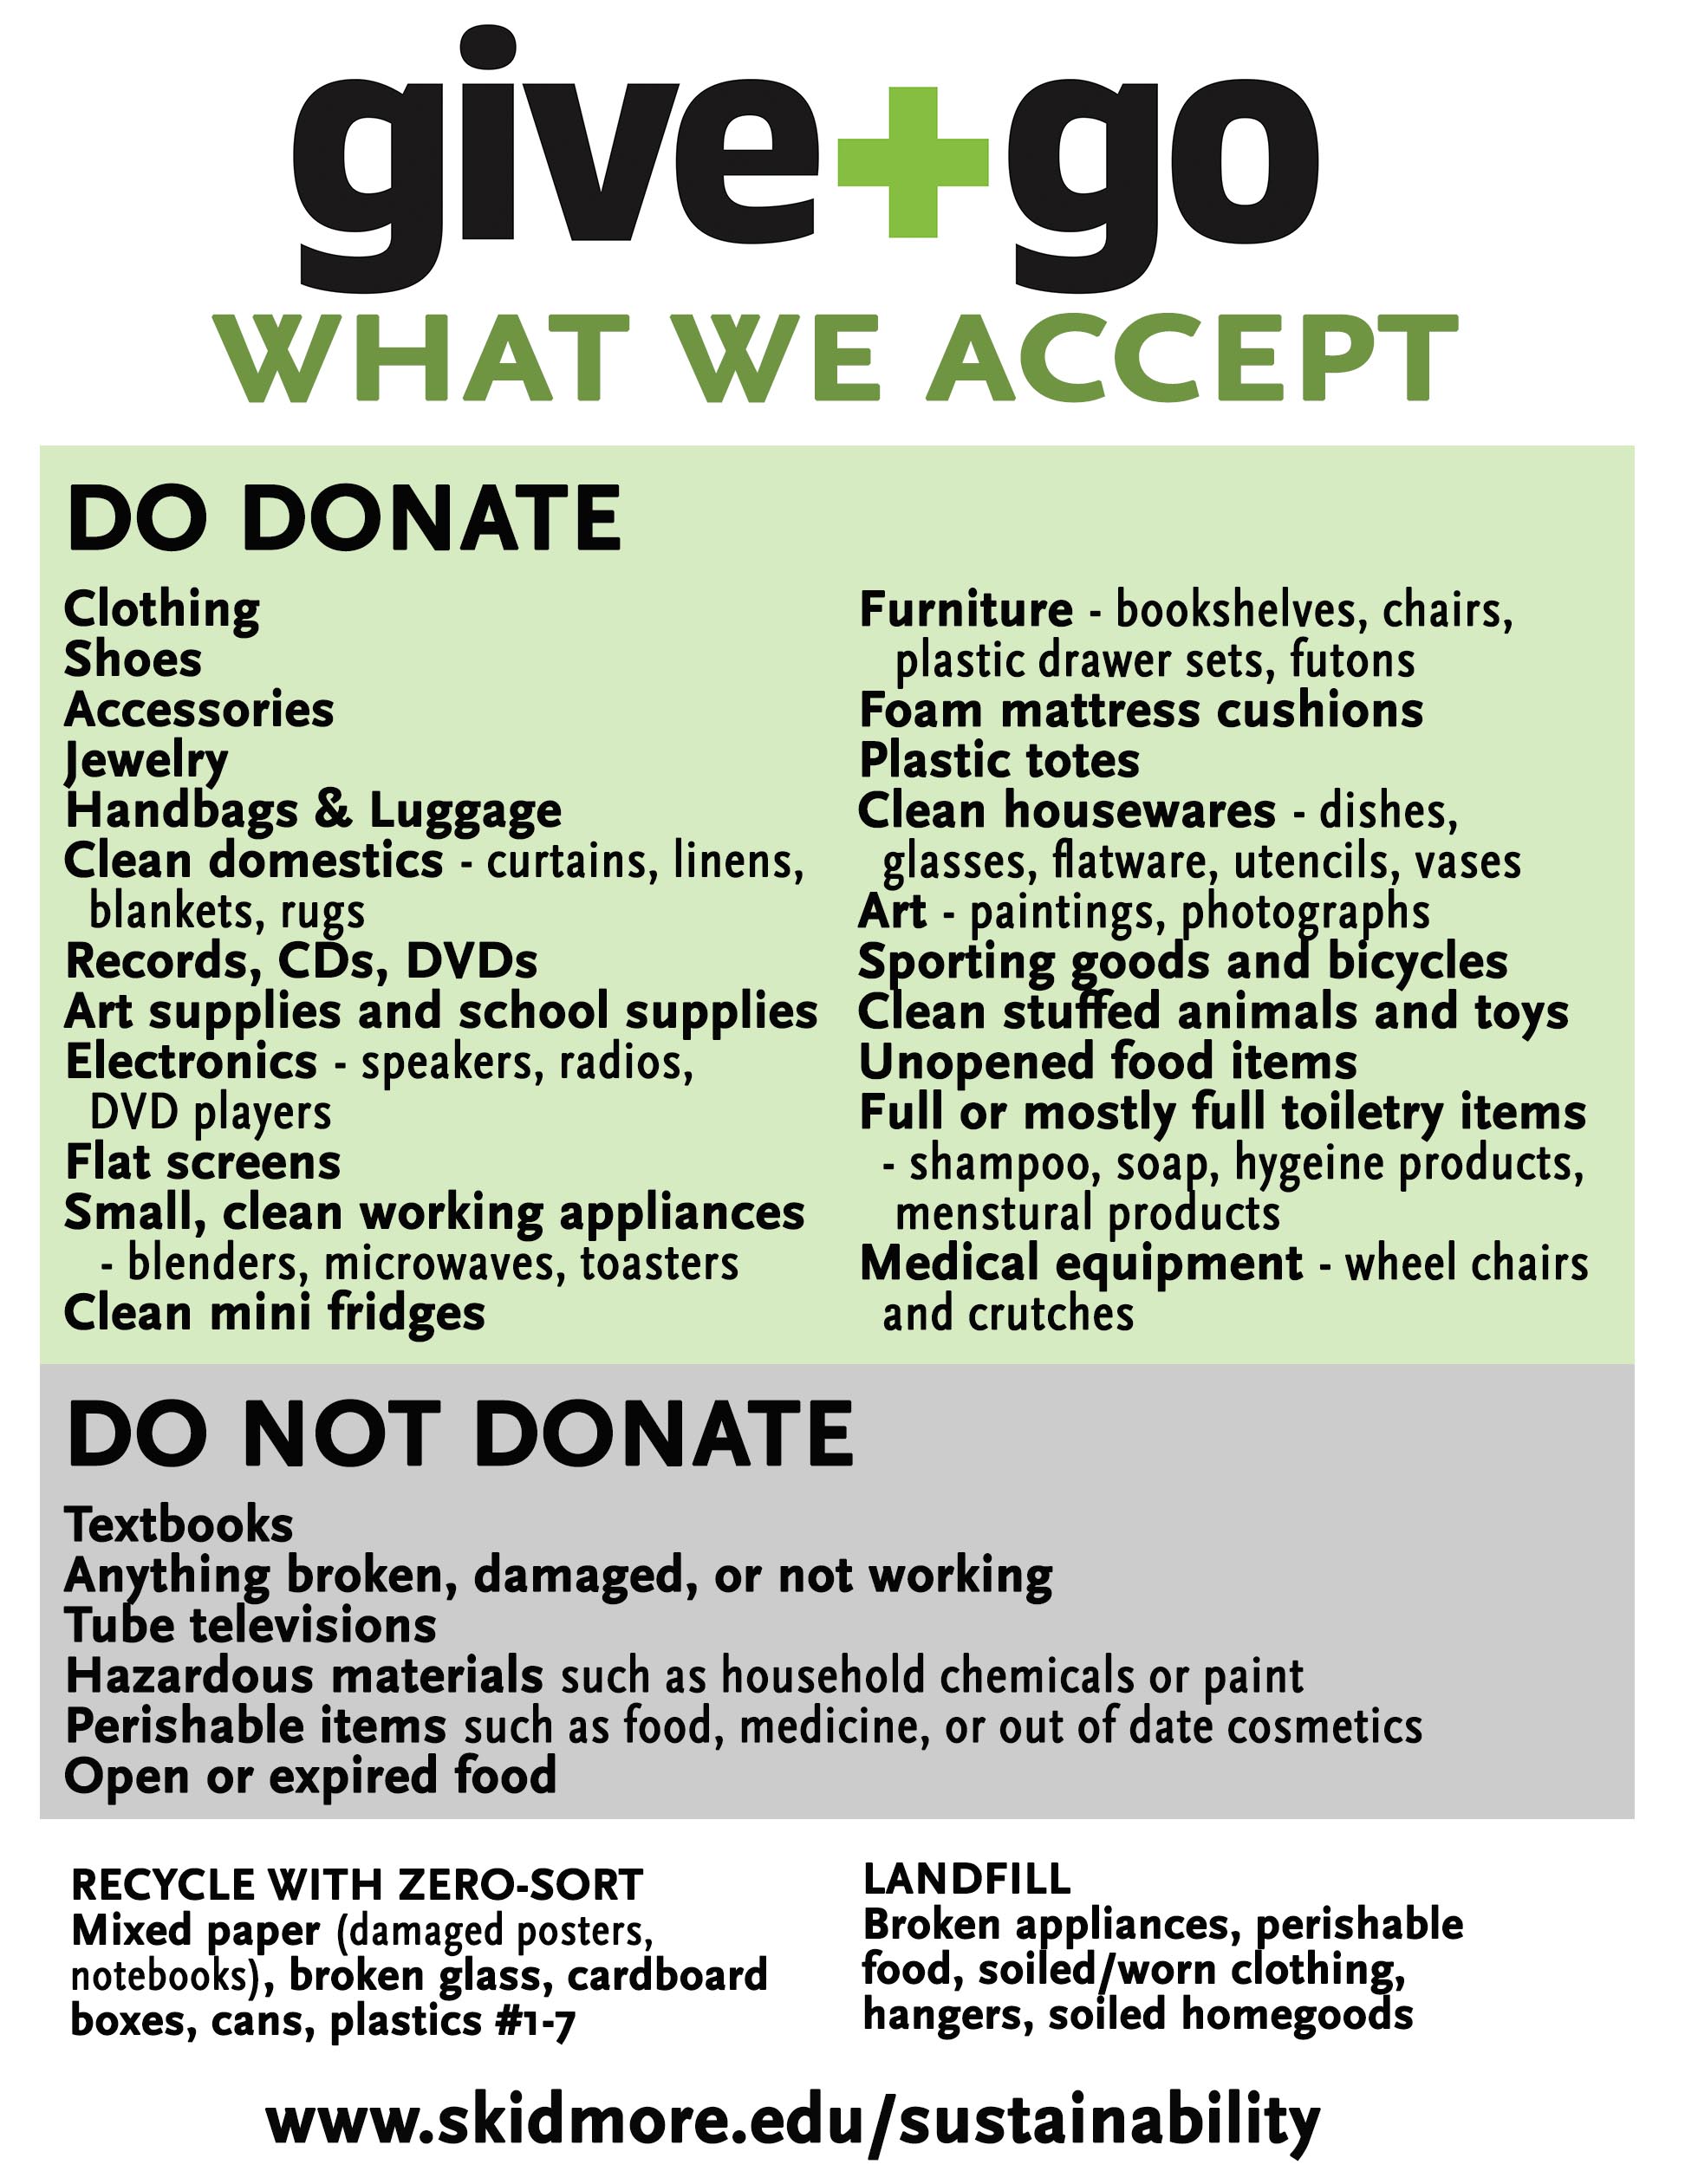 We cannot accept textbooks, broken goods, or perishable items.